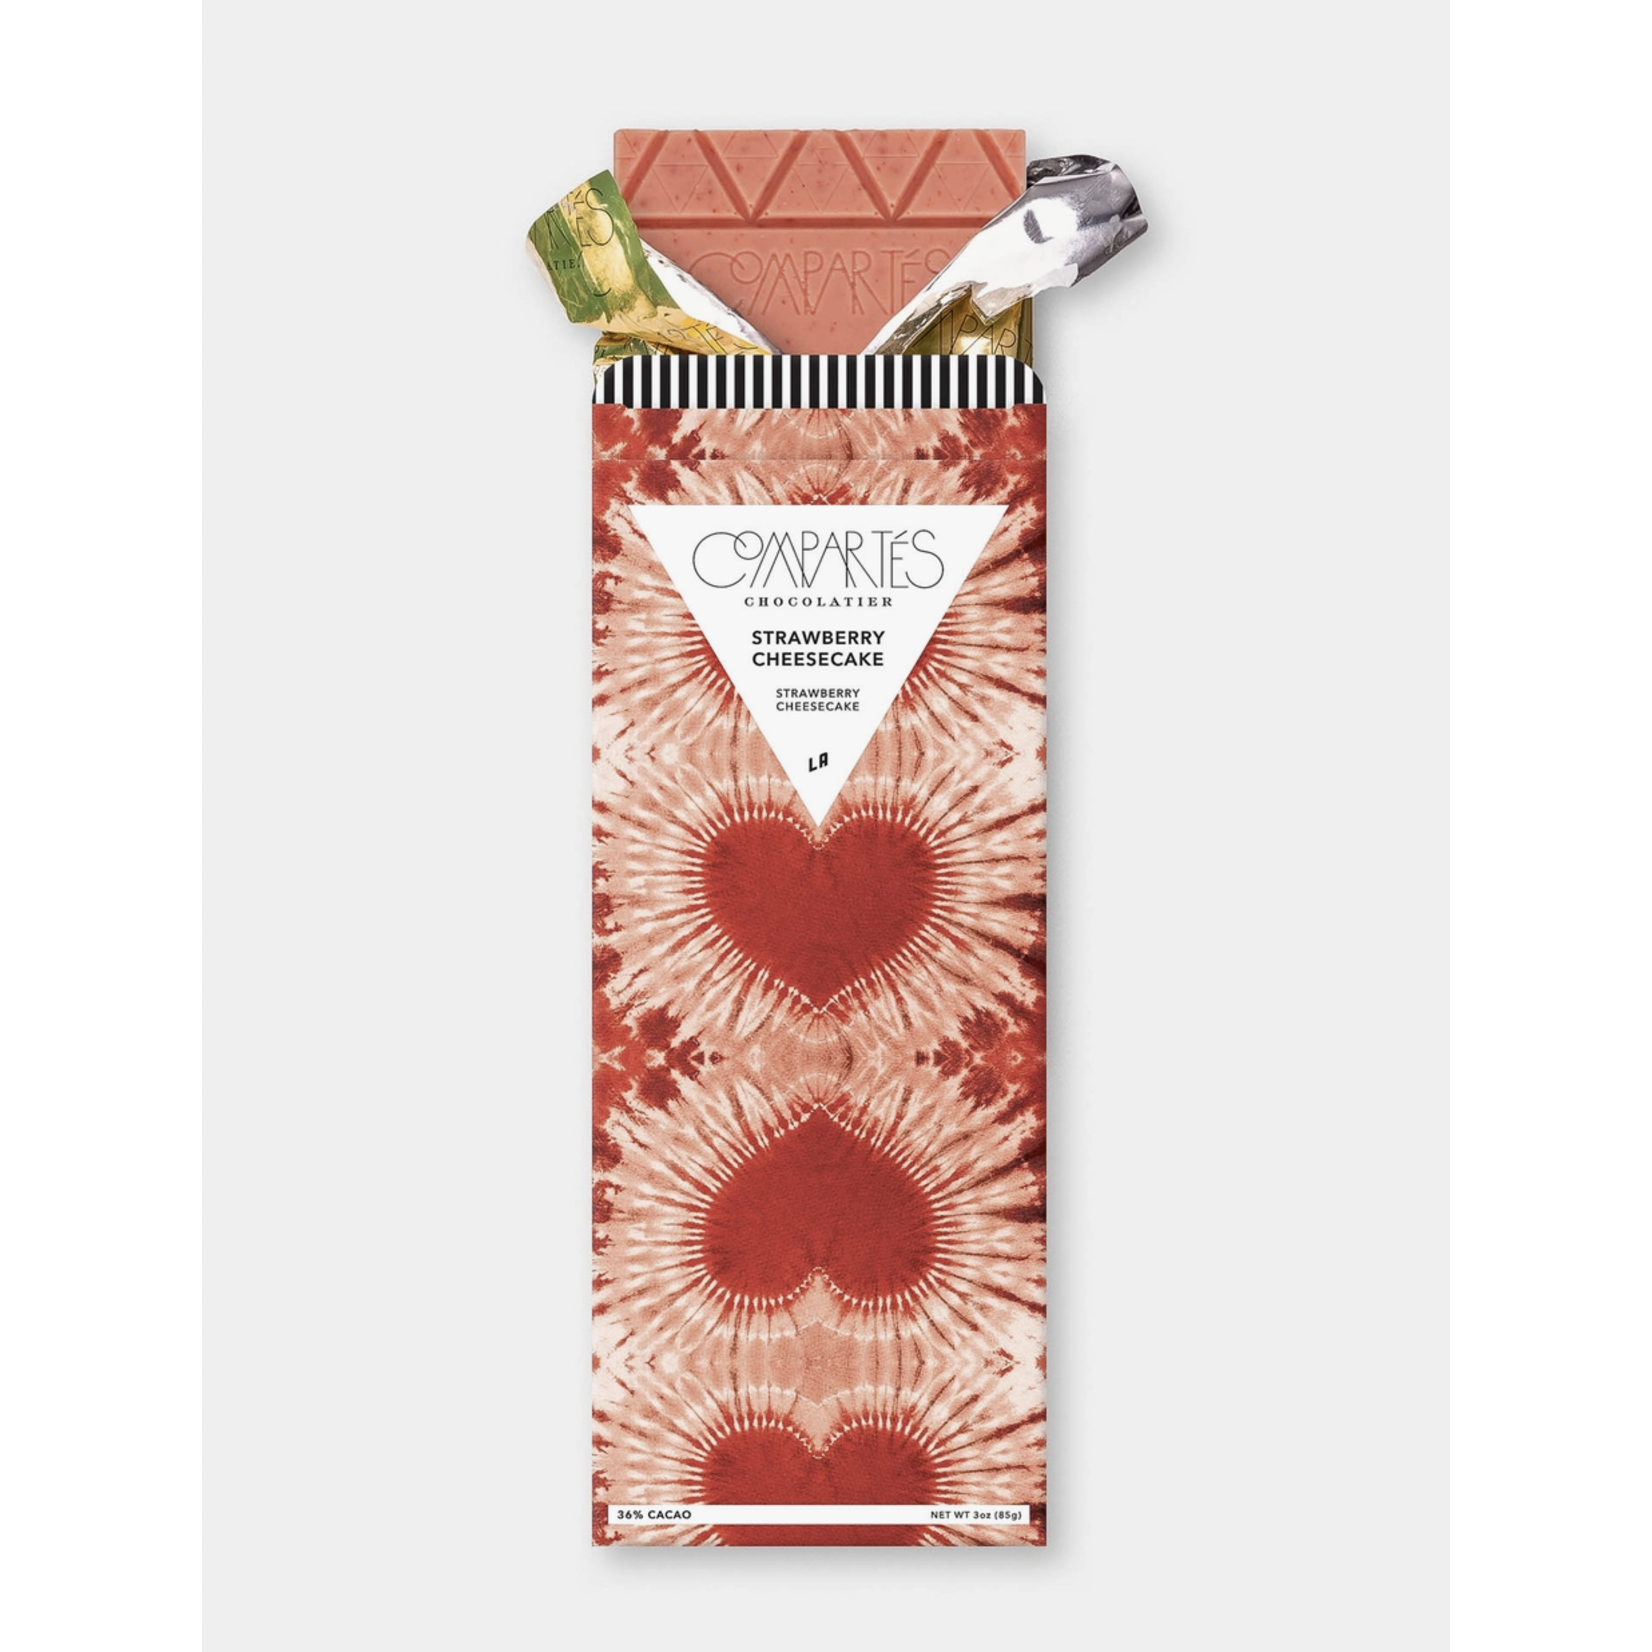 Compartes Chocolate Strawberry Cheesecake Gourmet Chocolate Bar